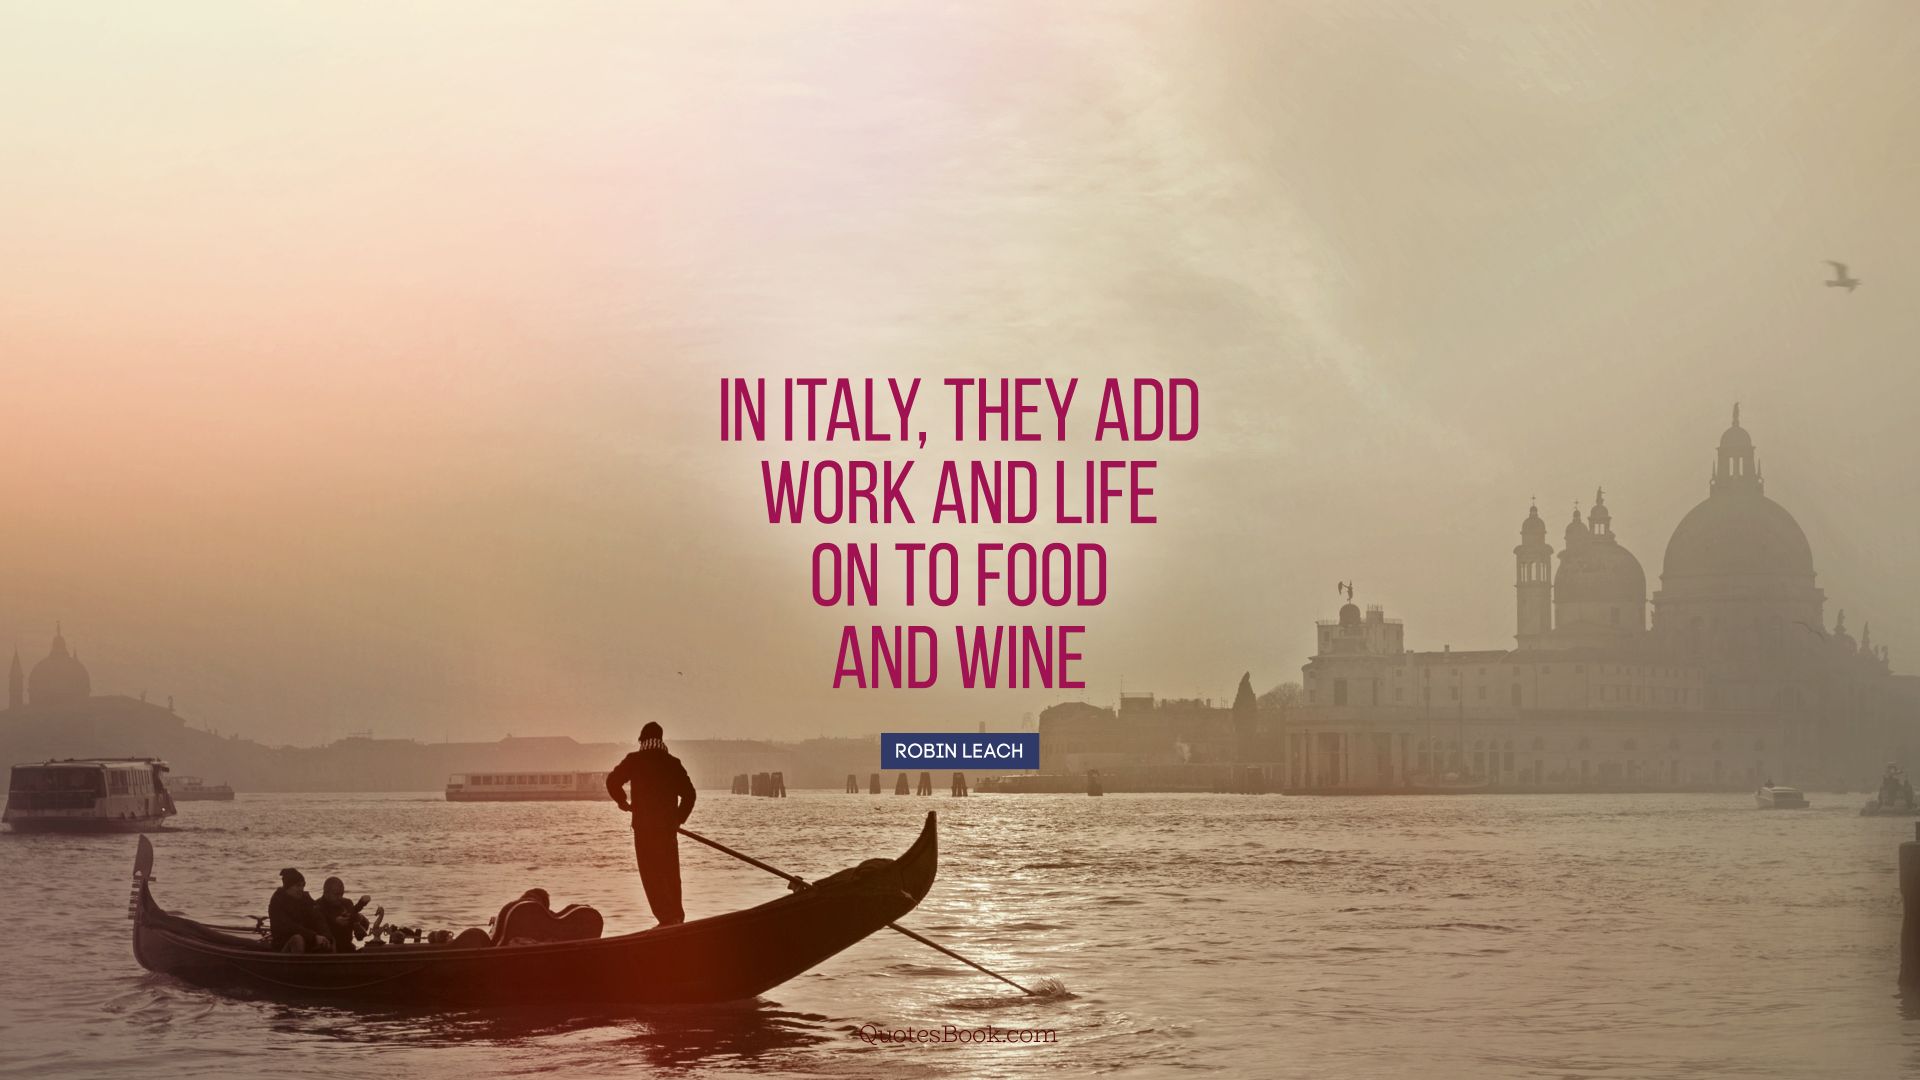 In Italy, they add work and life on to food and wine. - Quote by Robin Leach